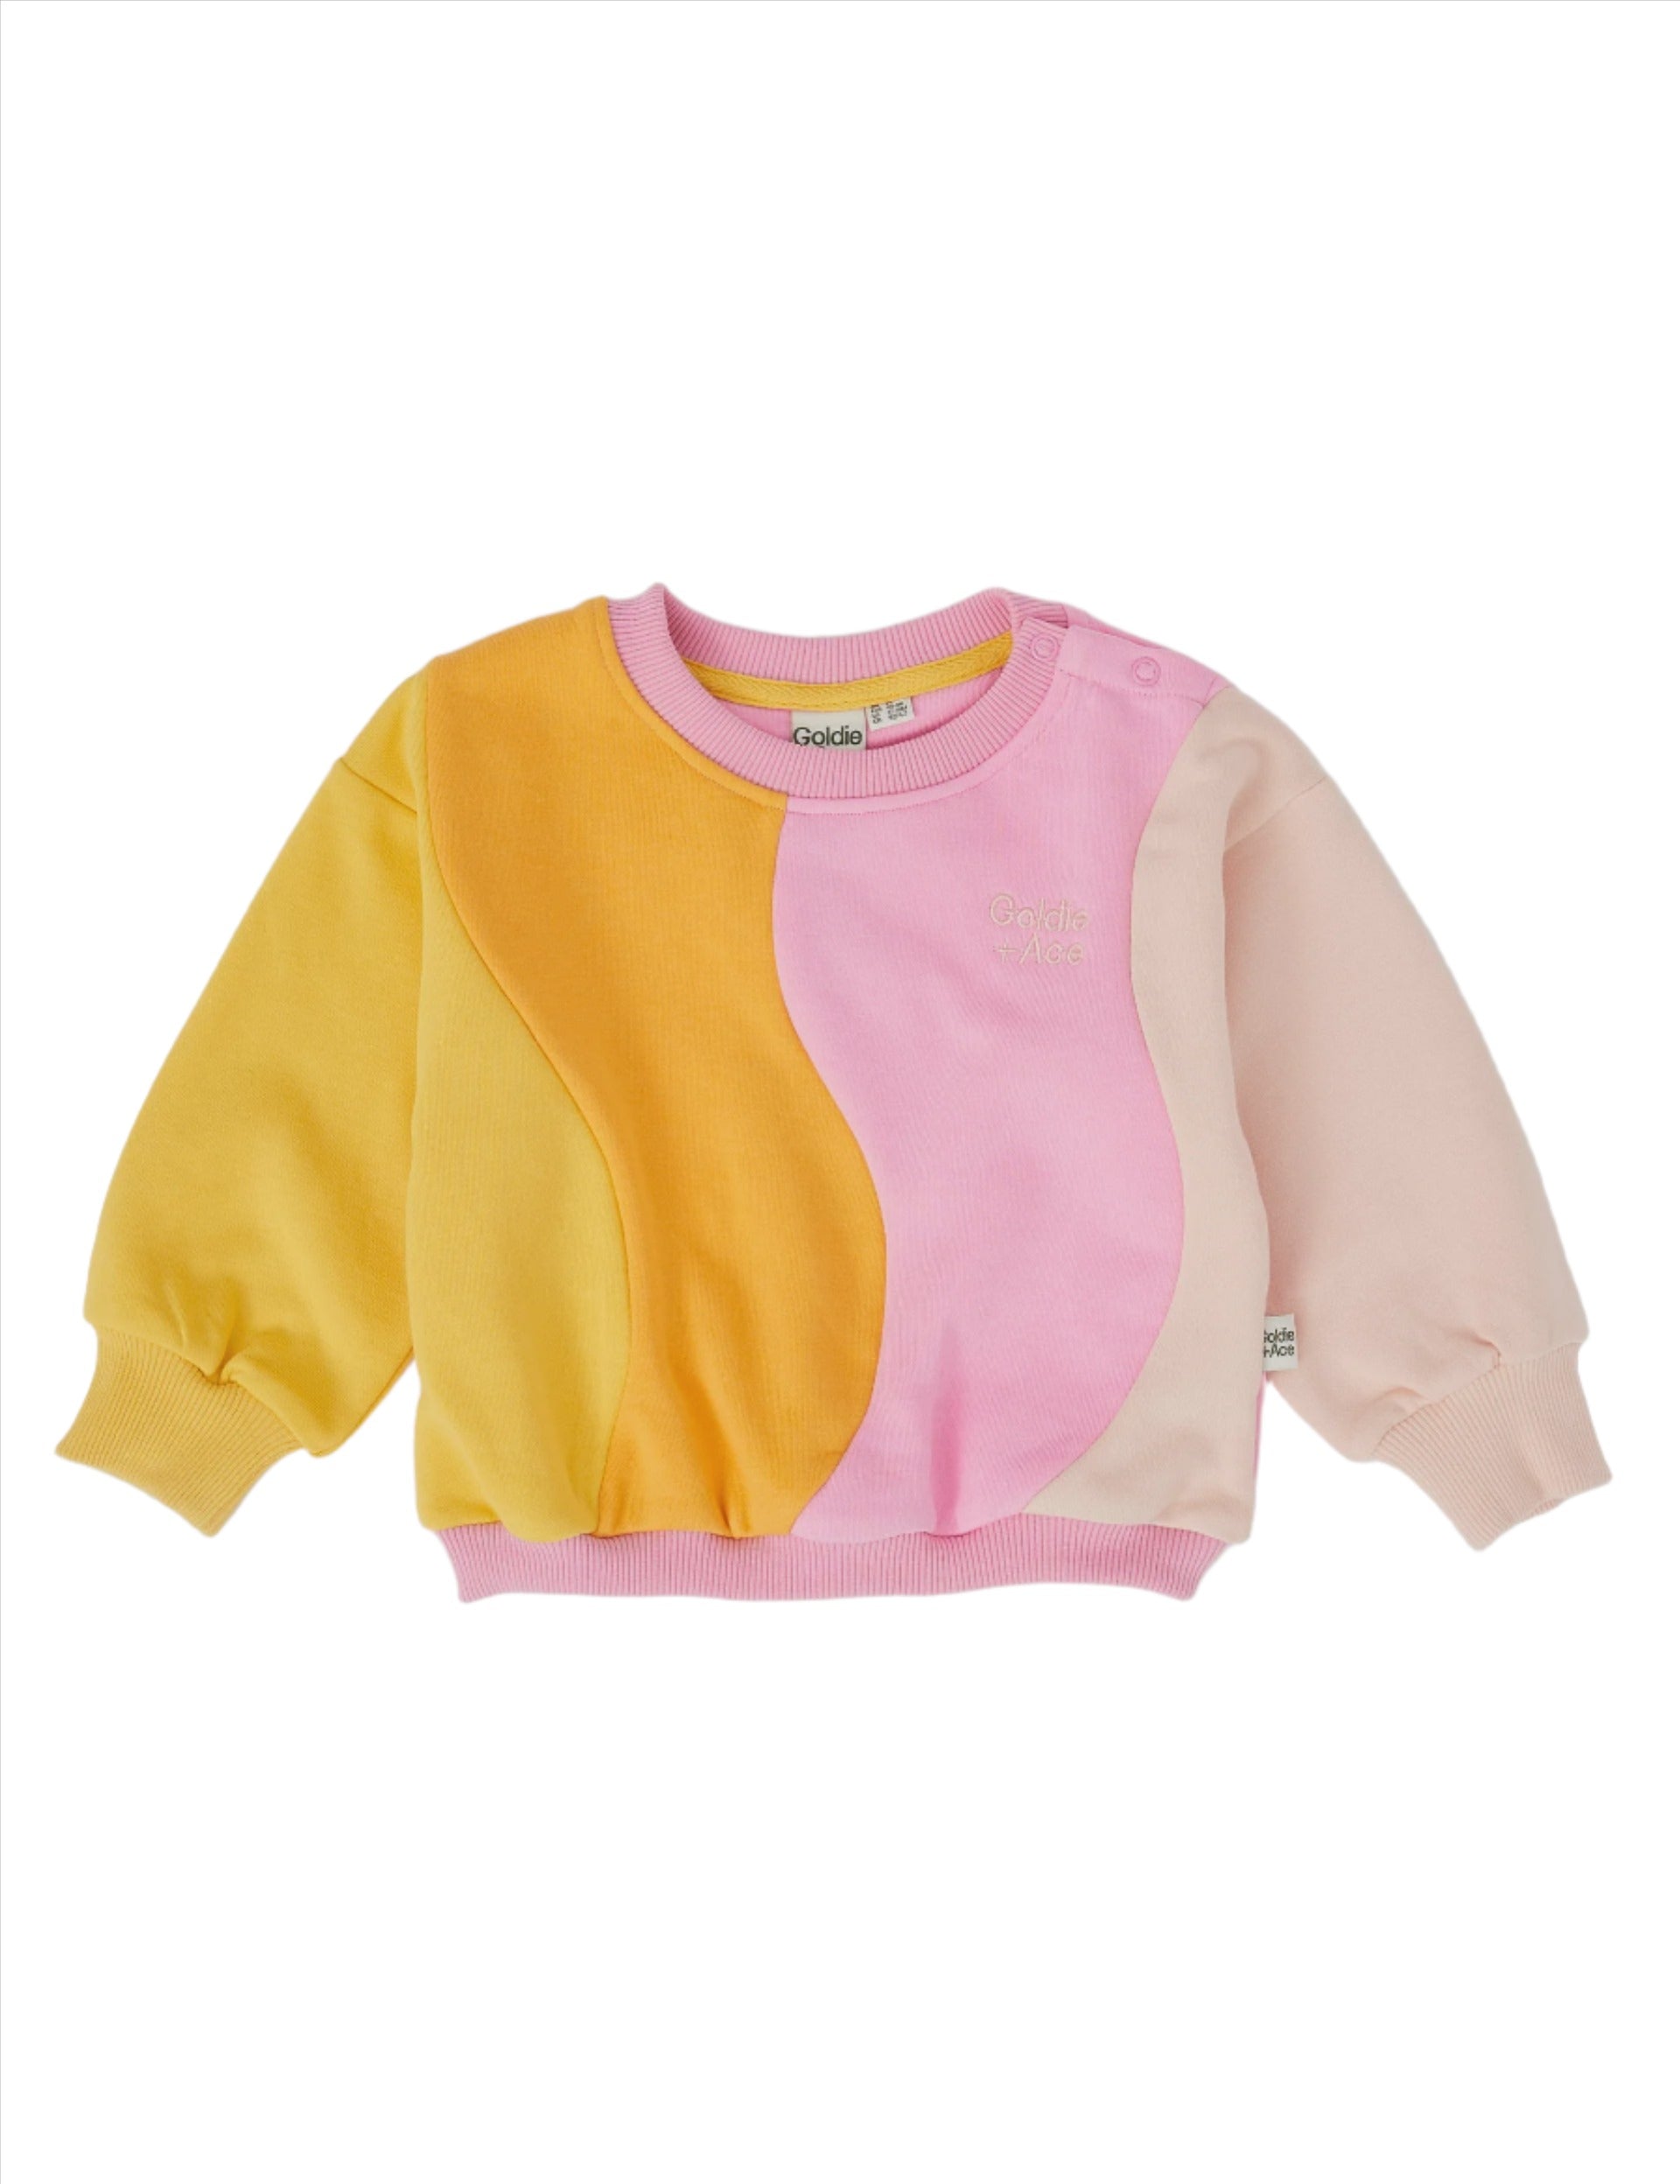 RIO WAVE SWEATER SUNSET |  Goldie and Ace